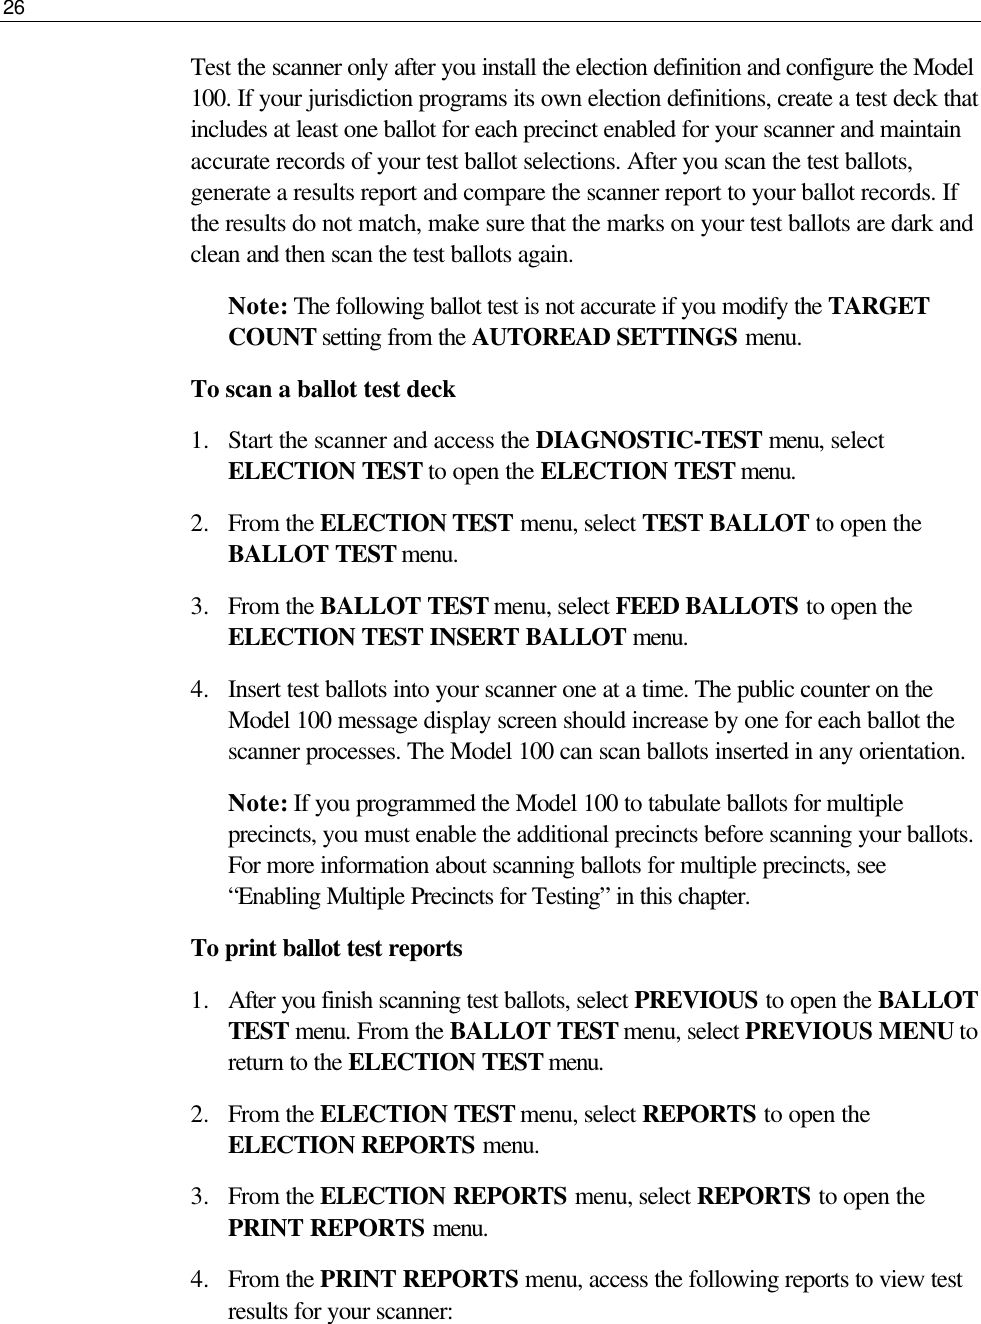 26  Test the scanner only after you install the election definition and configure the Model 100. If your jurisdiction programs its own election definitions, create a test deck that includes at least one ballot for each precinct enabled for your scanner and maintain accurate records of your test ballot selections. After you scan the test ballots, generate a results report and compare the scanner report to your ballot records. If the results do not match, make sure that the marks on your test ballots are dark and clean and then scan the test ballots again. Note: The following ballot test is not accurate if you modify the TARGET COUNT setting from the AUTOREAD SETTINGS menu.  To scan a ballot test deck 1.  Start the scanner and access the DIAGNOSTIC-TEST menu, select ELECTION TEST to open the ELECTION TEST menu. 2.  From the ELECTION TEST menu, select TEST BALLOT to open the BALLOT TEST menu.  3.  From the BALLOT TEST menu, select FEED BALLOTS to open the ELECTION TEST INSERT BALLOT menu. 4.  Insert test ballots into your scanner one at a time. The public counter on the Model 100 message display screen should increase by one for each ballot the scanner processes. The Model 100 can scan ballots inserted in any orientation. Note: If you programmed the Model 100 to tabulate ballots for multiple precincts, you must enable the additional precincts before scanning your ballots. For more information about scanning ballots for multiple precincts, see “Enabling Multiple Precincts for Testing” in this chapter.  To print ballot test reports 1.  After you finish scanning test ballots, select PREVIOUS to open the BALLOT TEST menu. From the BALLOT TEST menu, select PREVIOUS MENU to return to the ELECTION TEST menu. 2.  From the ELECTION TEST menu, select REPORTS to open the ELECTION REPORTS menu.  3.  From the ELECTION REPORTS menu, select REPORTS to open the PRINT REPORTS menu. 4.  From the PRINT REPORTS menu, access the following reports to view test results for your scanner: 